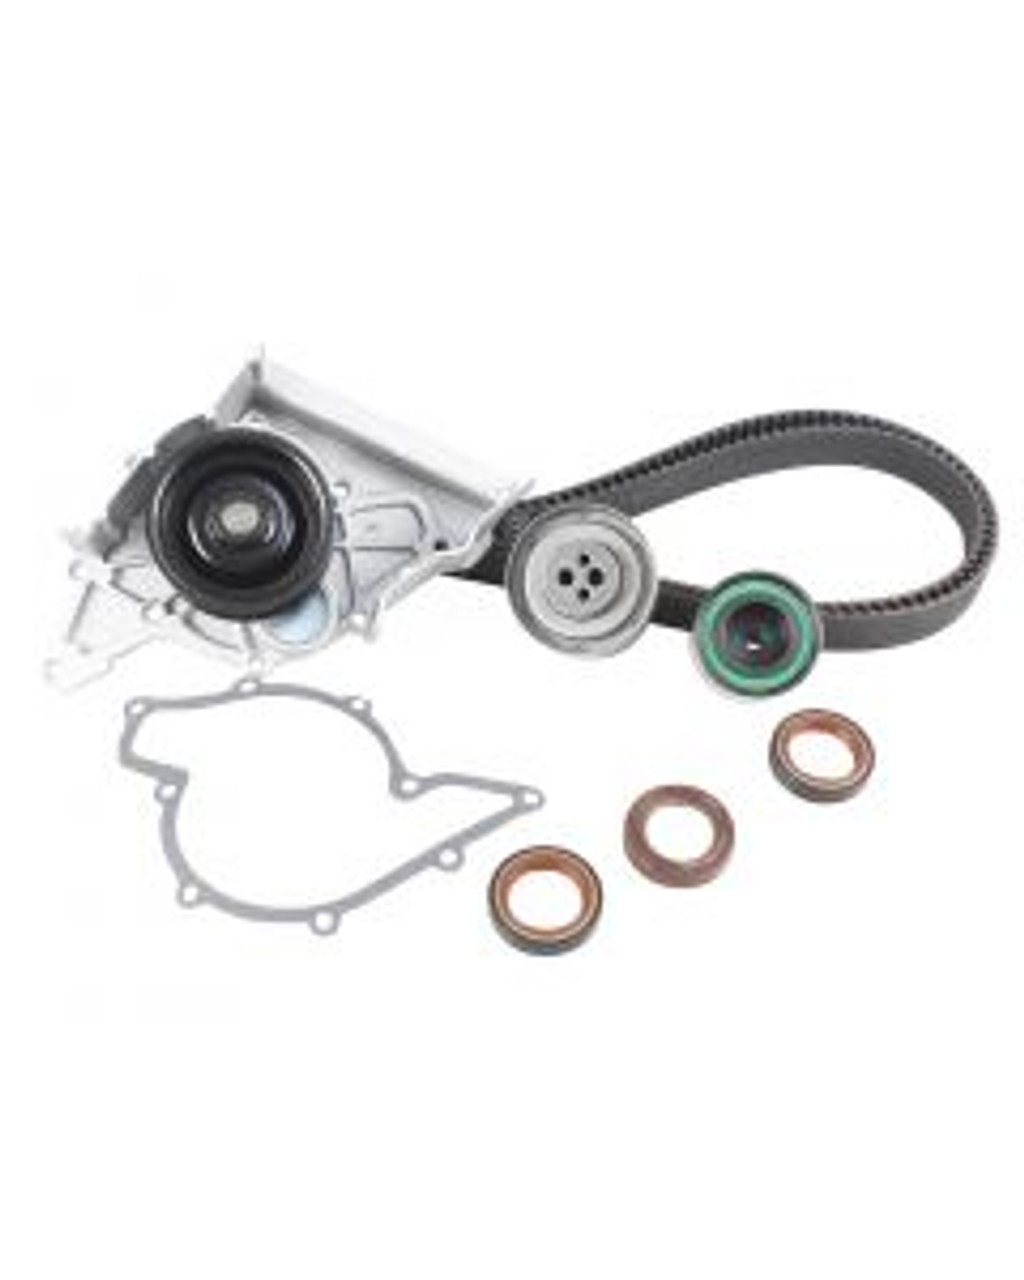 Timing Belt Kit with Water Pump 2.8L 1995 Audi A6 - TBK806WP.12